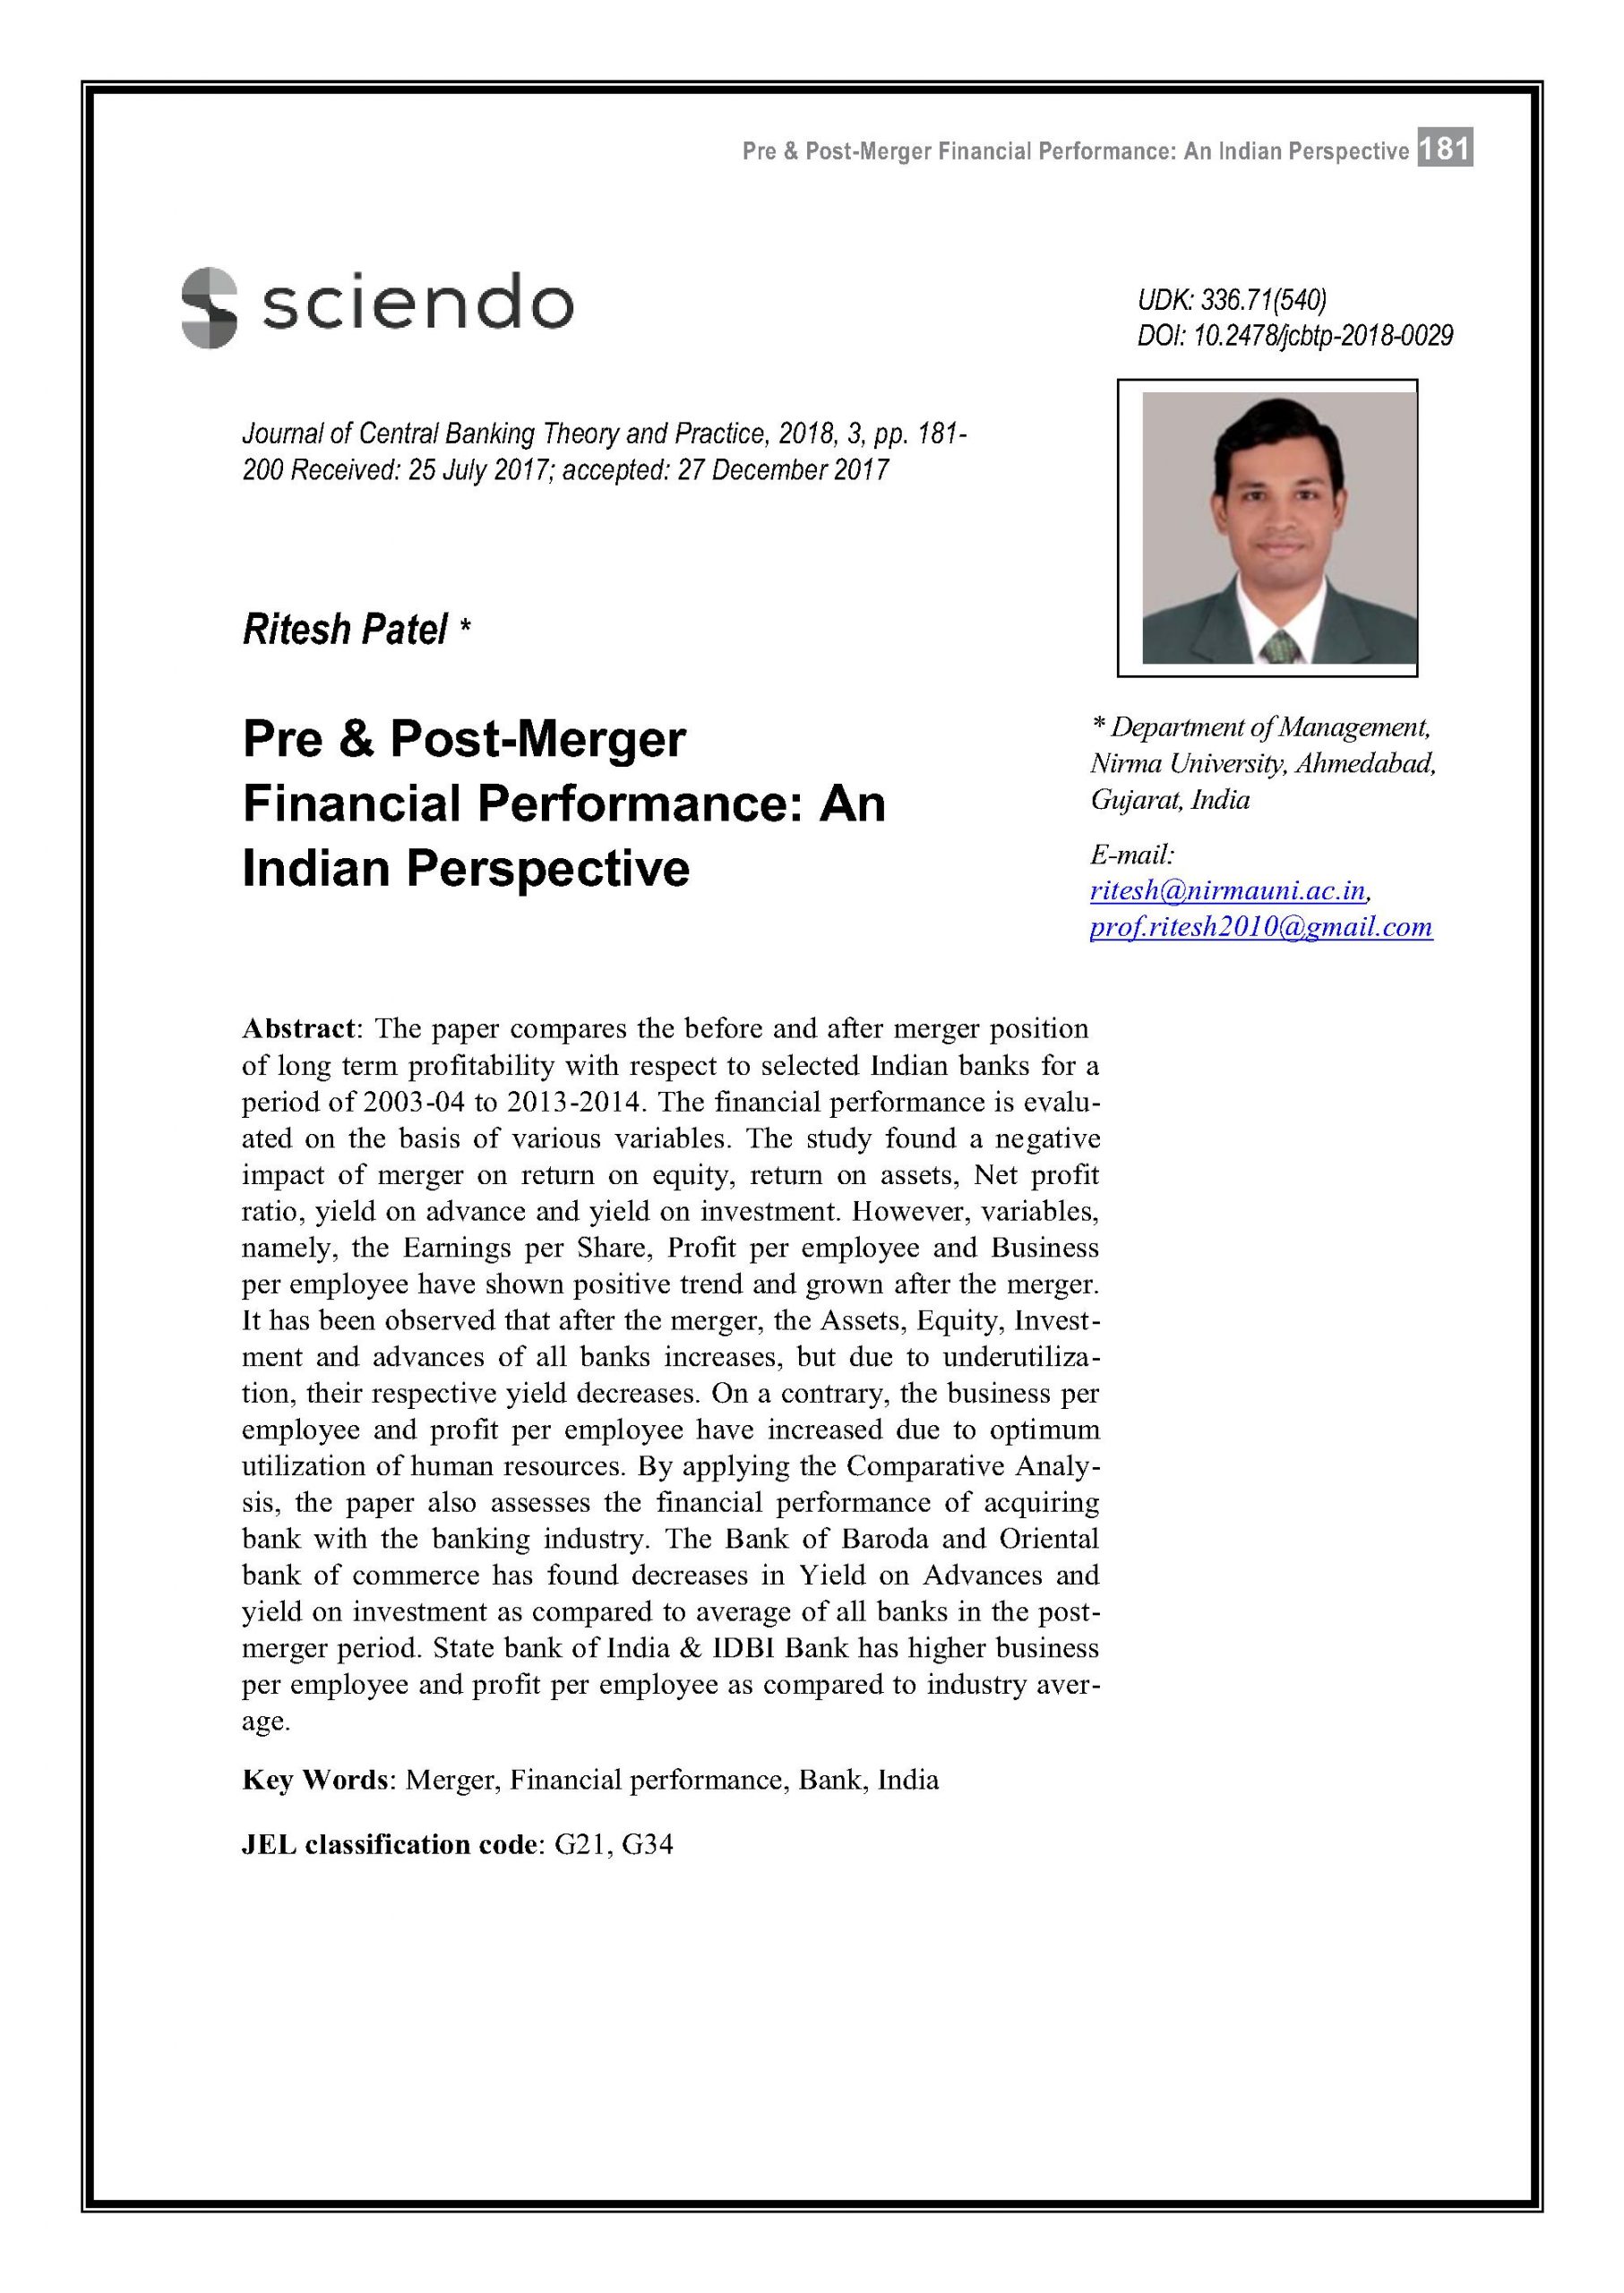 Pre & Post-Merger Financial Performance: An Indian Perspective